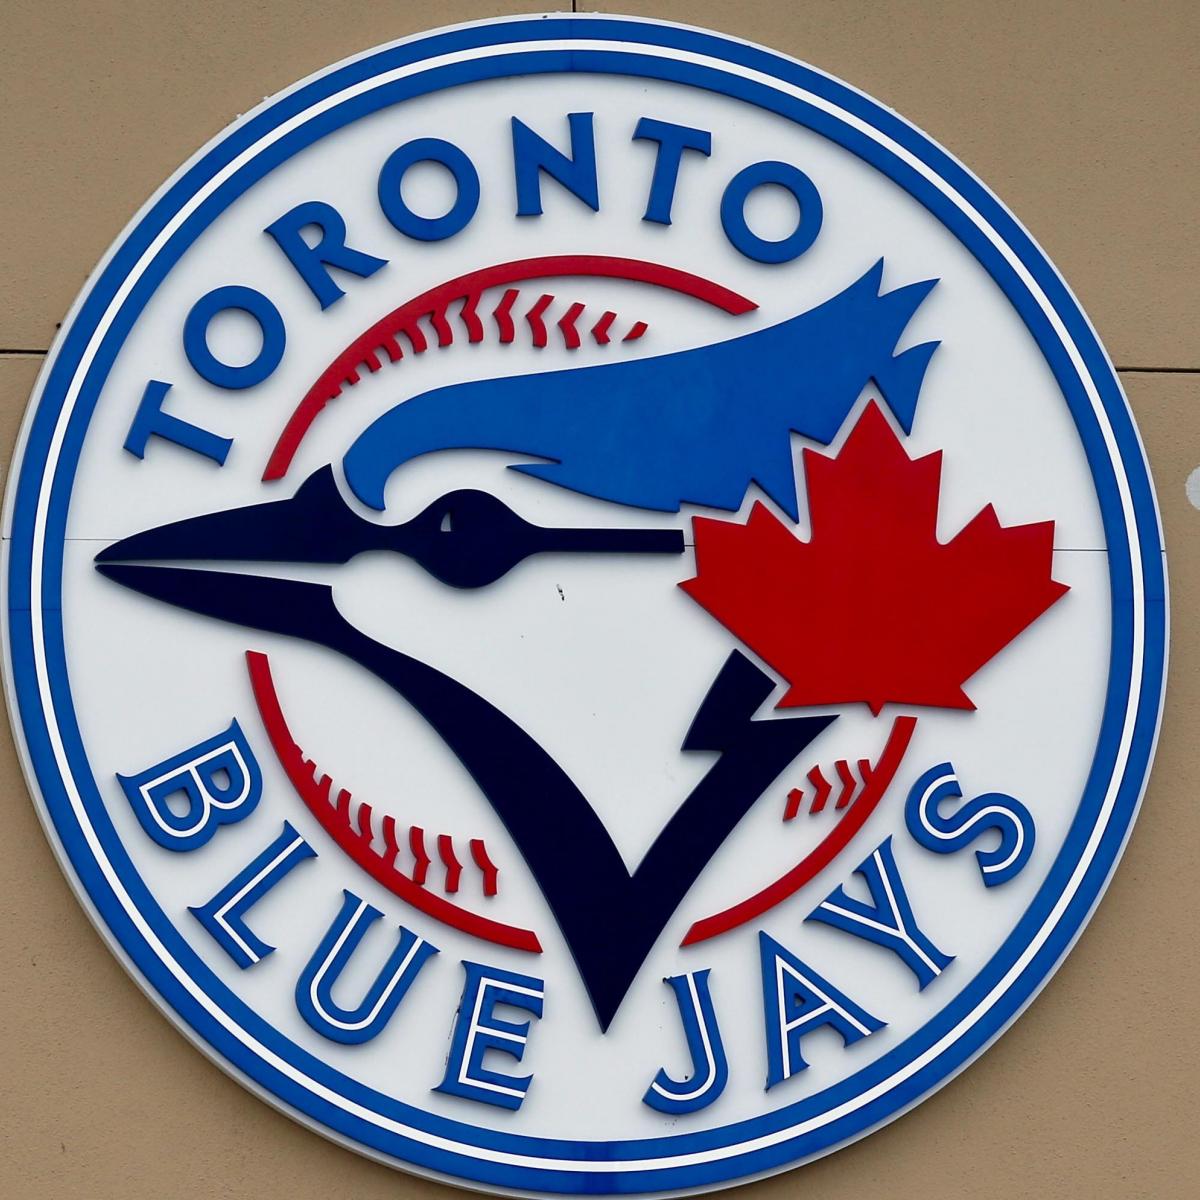 Why Roger Clemens deserves a more prominent place in Blue Jays lore